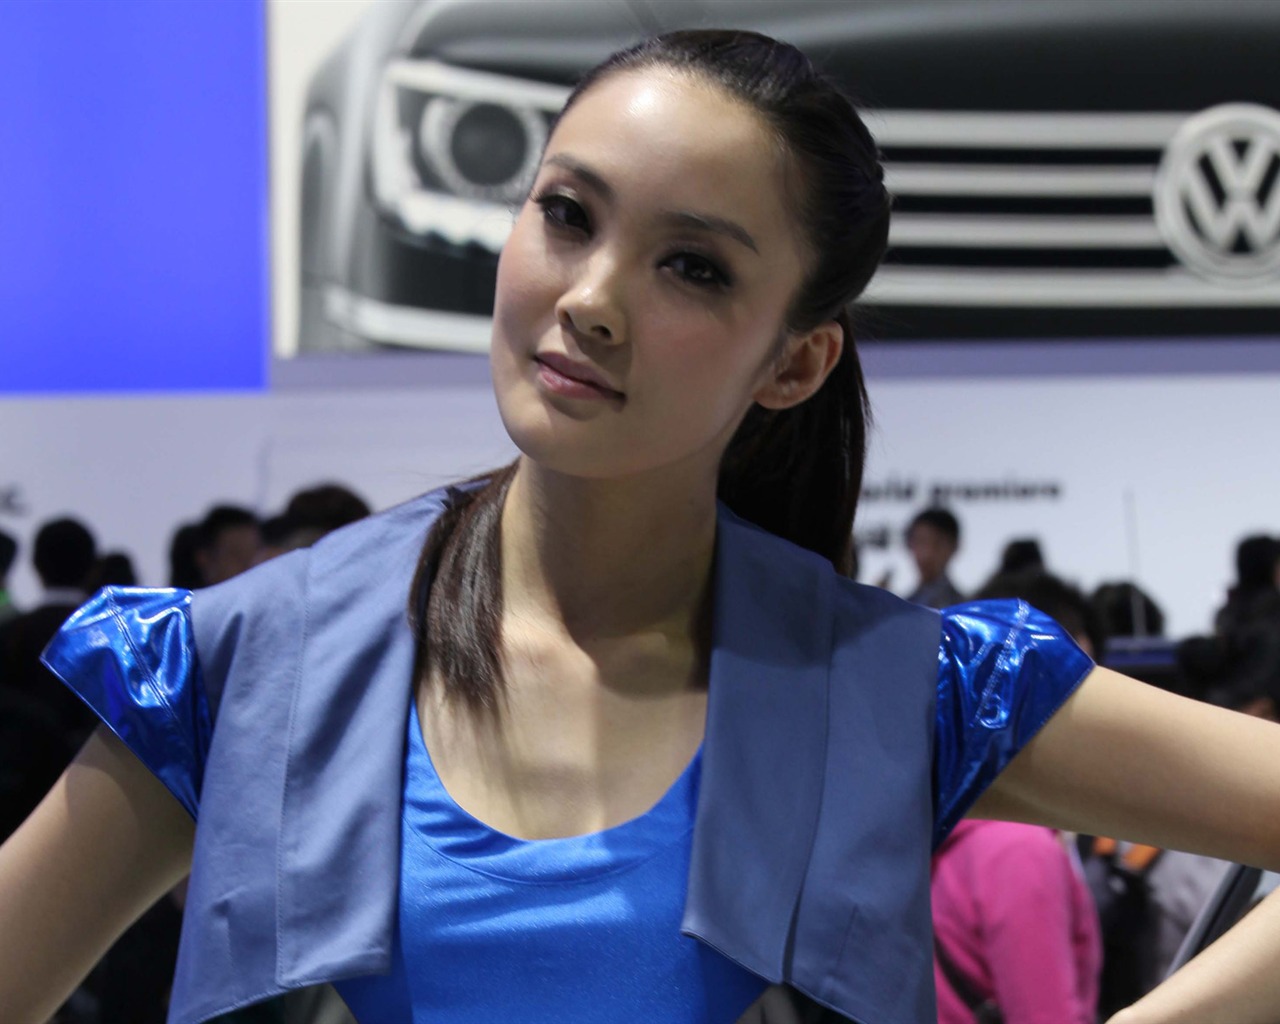 2010 Beijing International Auto Show beauty (2) (the wind chasing the clouds works) #7 - 1280x1024